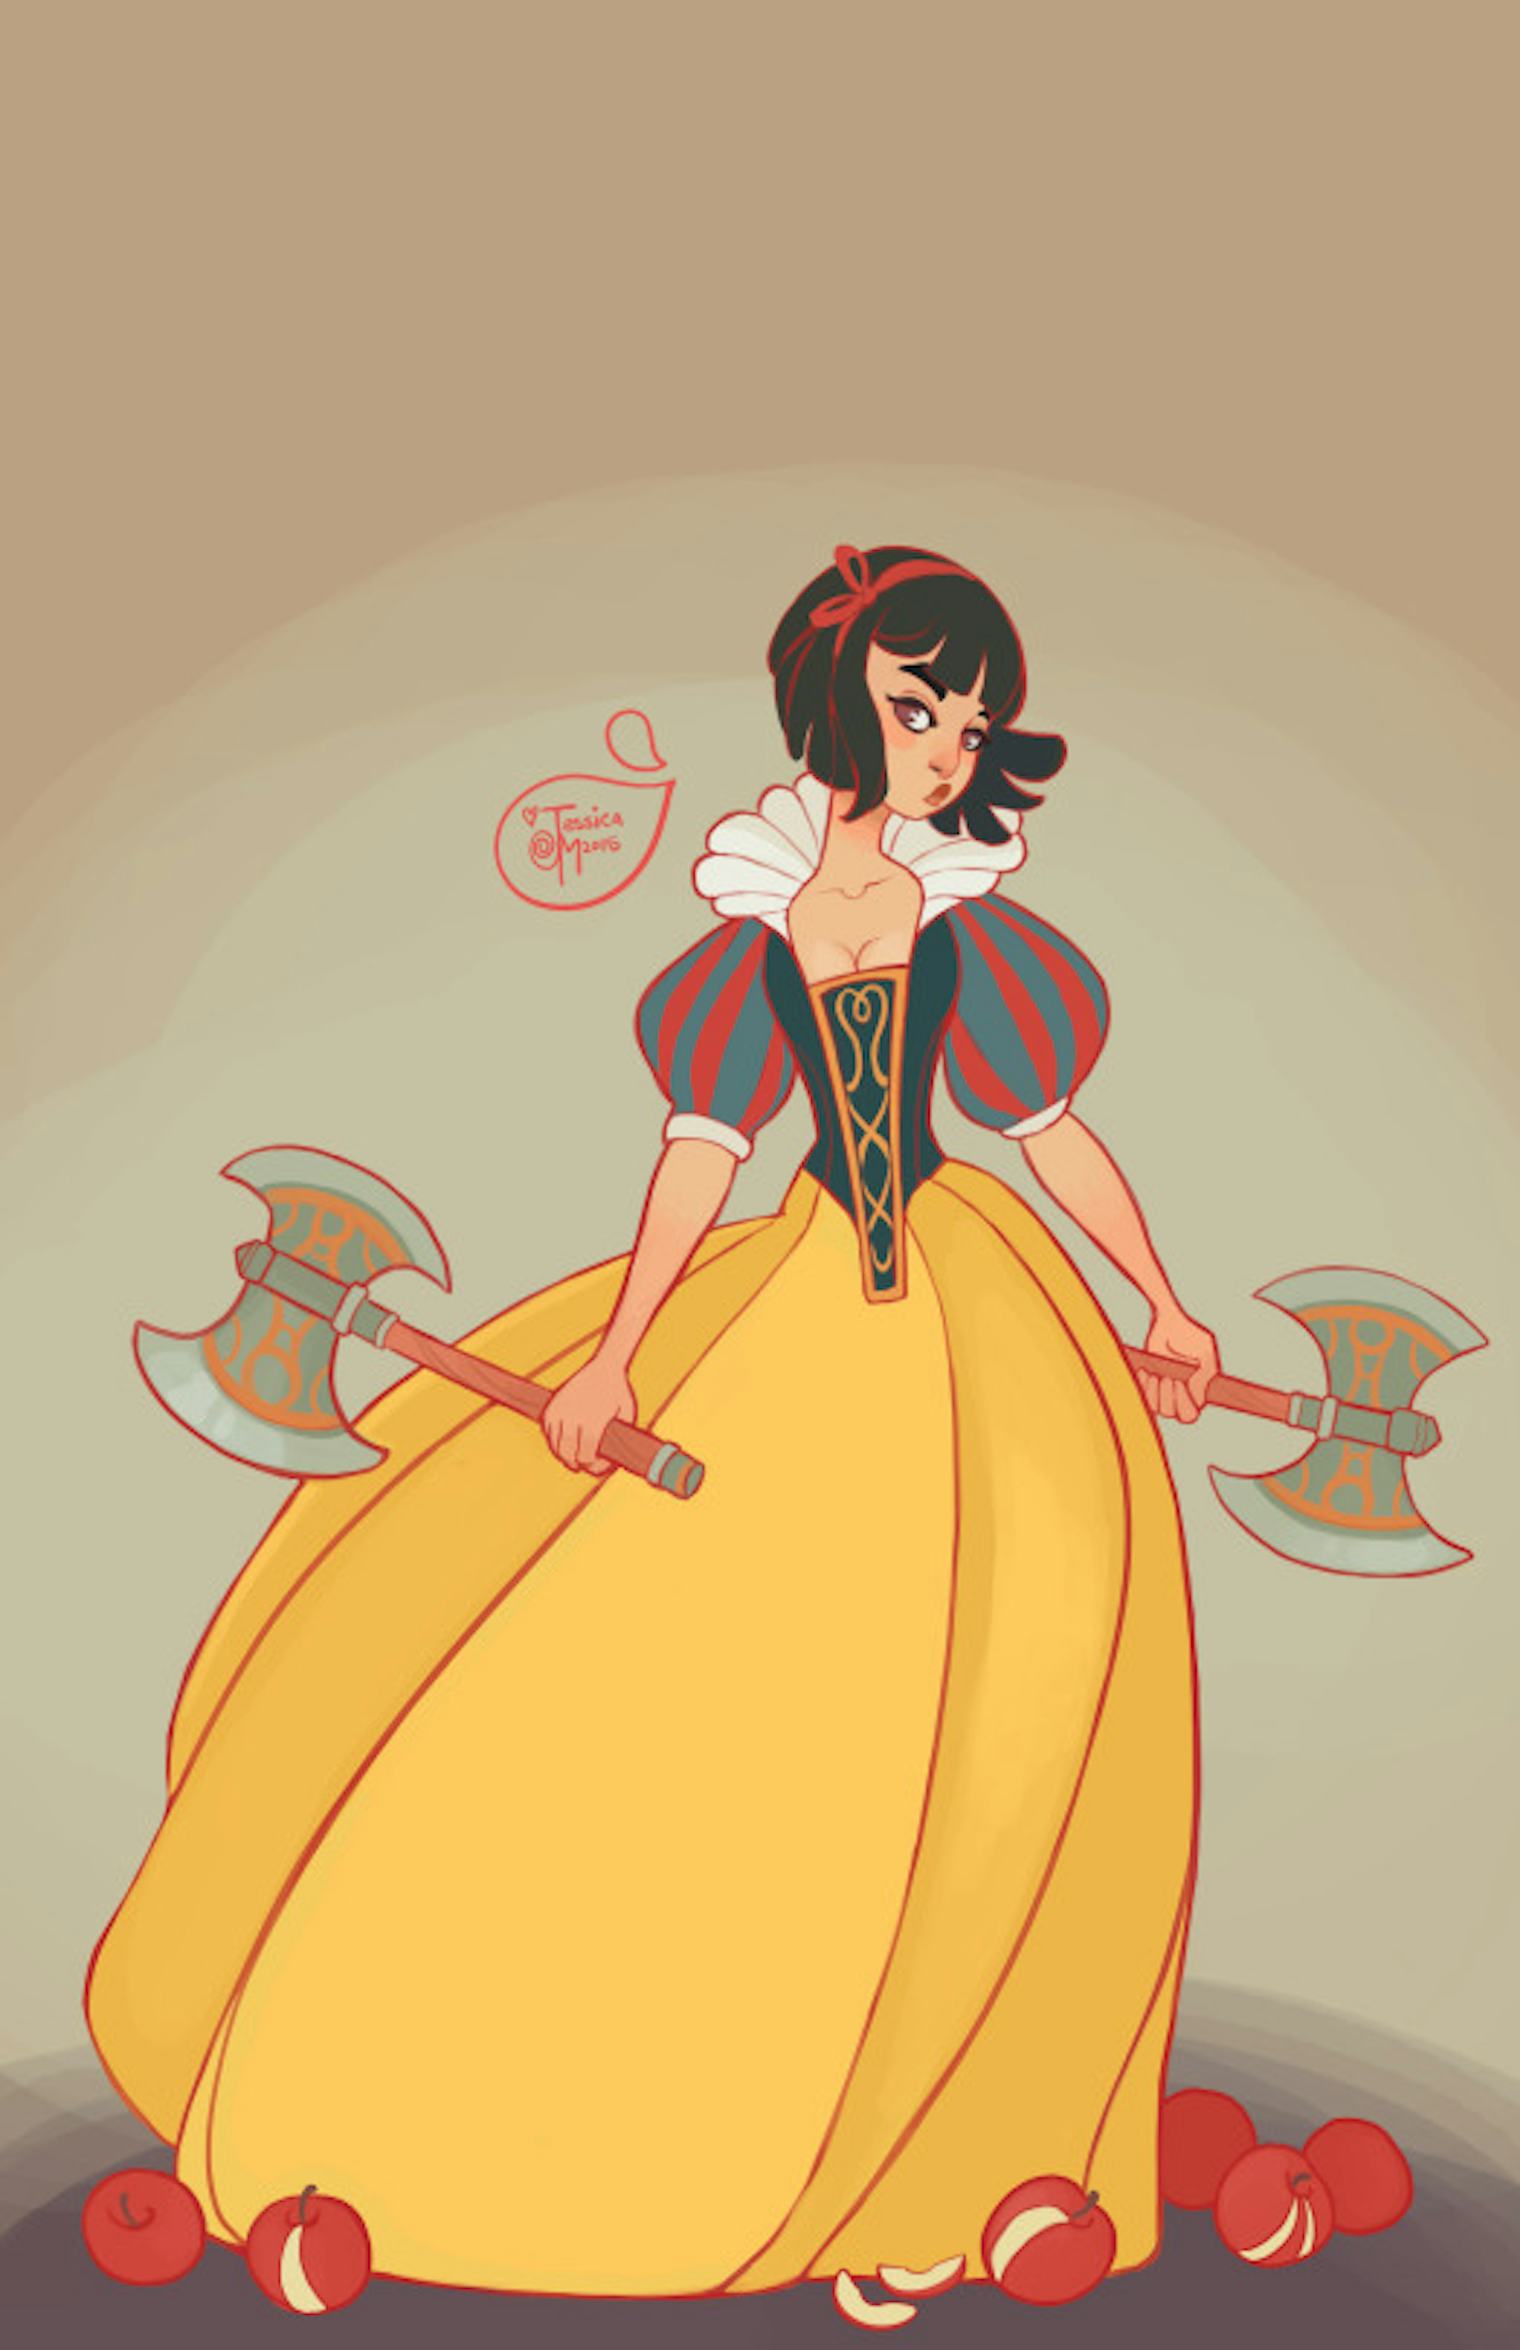 Disney Princesses Reimagined As Warriors Bring Grit To Your Fave Fairy